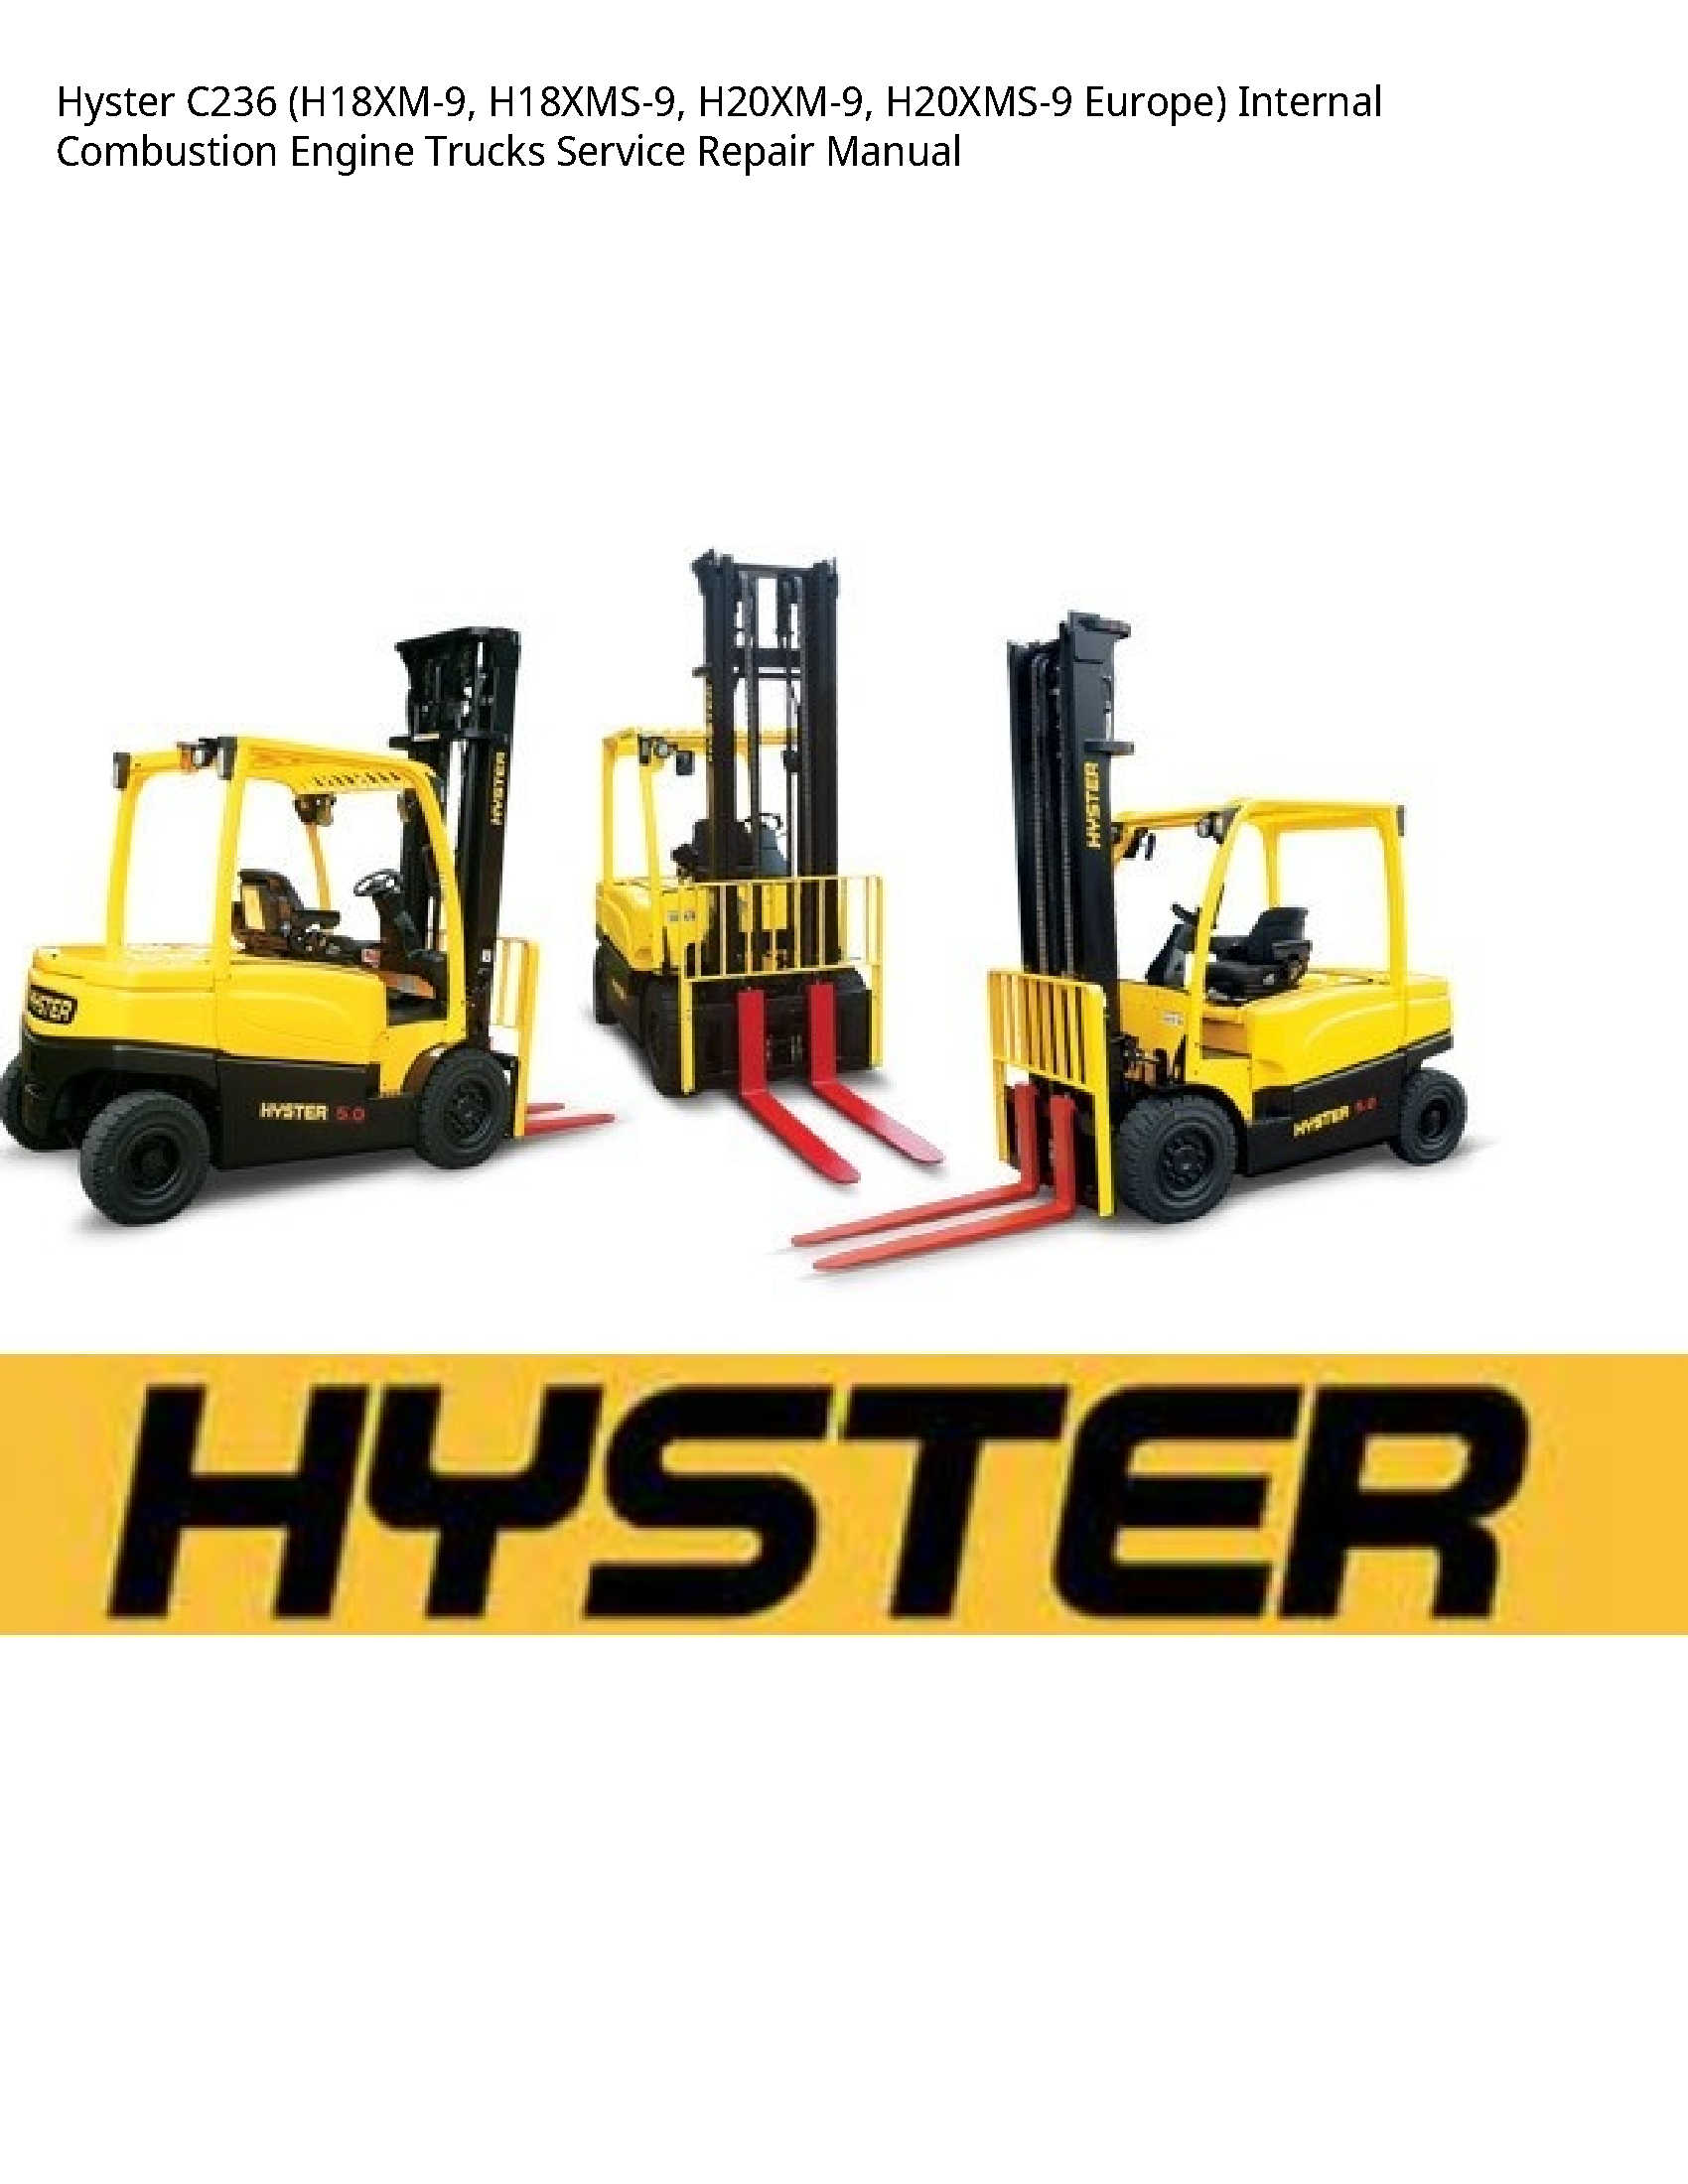 Hyster C236 Europe) Internal Combustion Engine Trucks manual